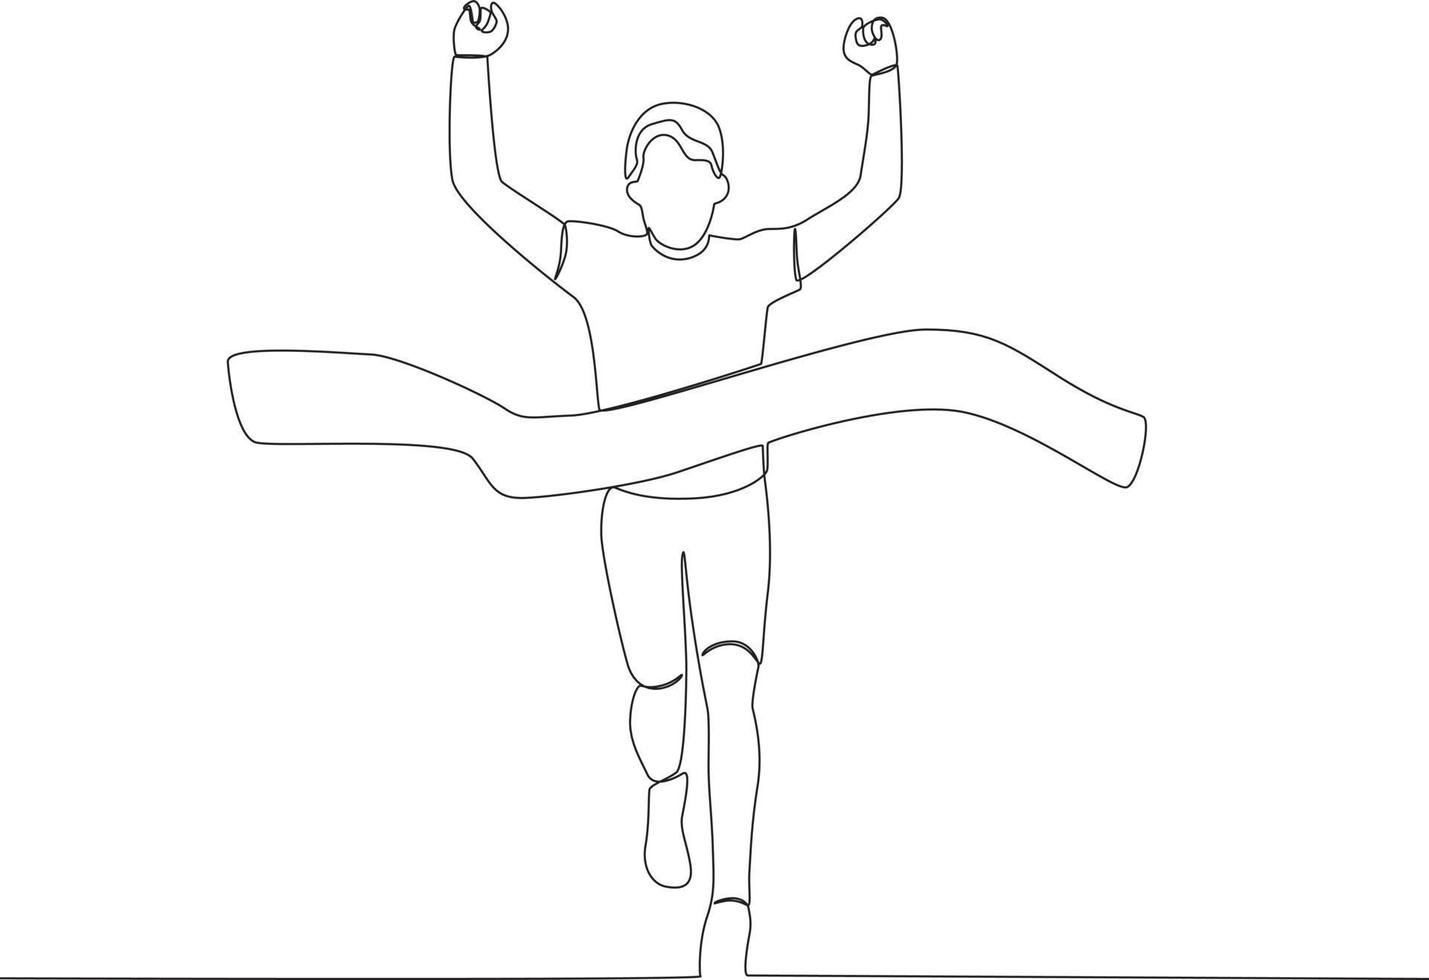 A happy man reached the finish line vector